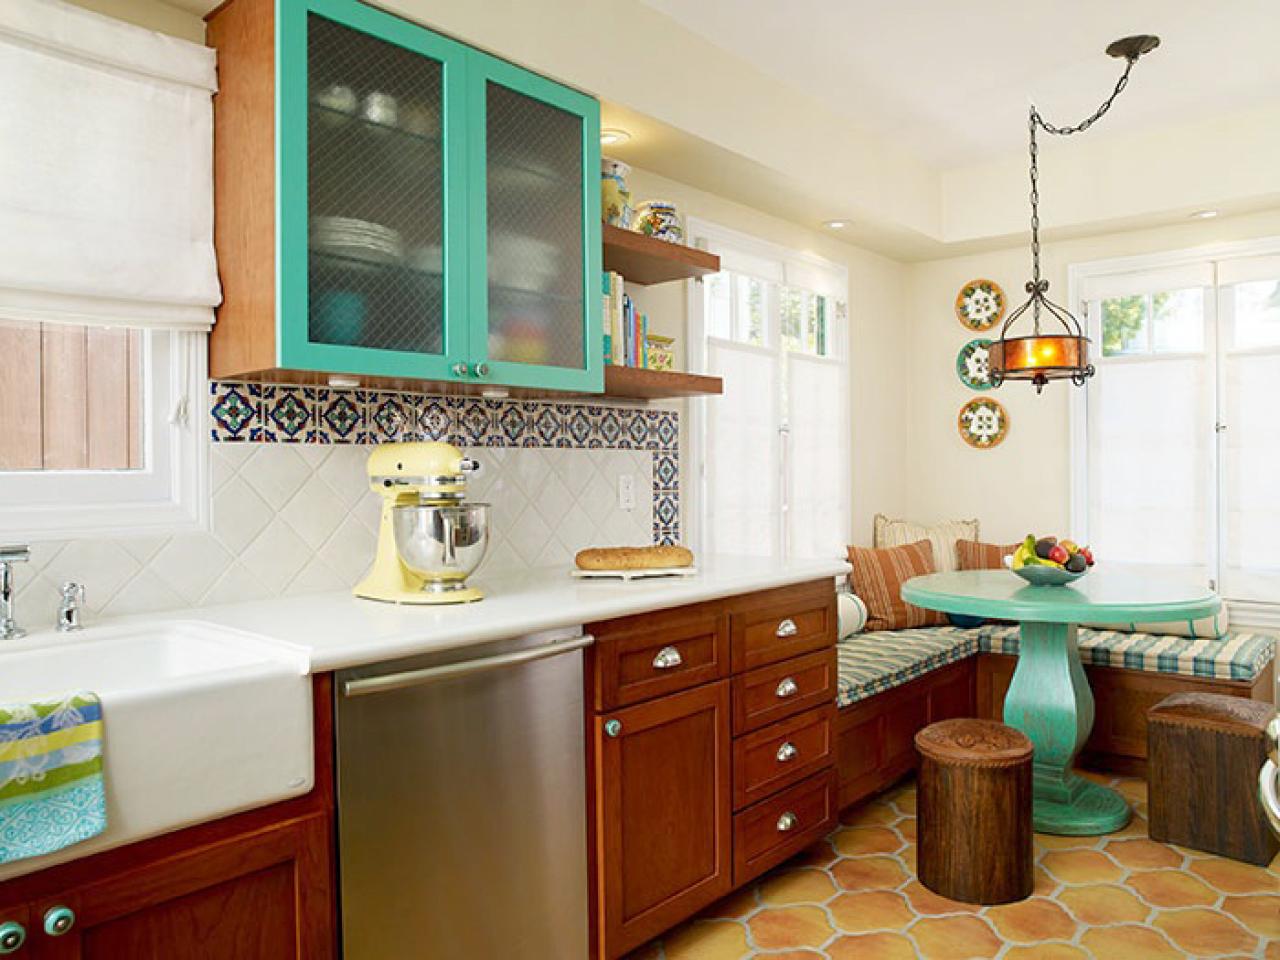 Kitchen Cabinet Paint Colors Pictures Ideas From HGTV HGTV